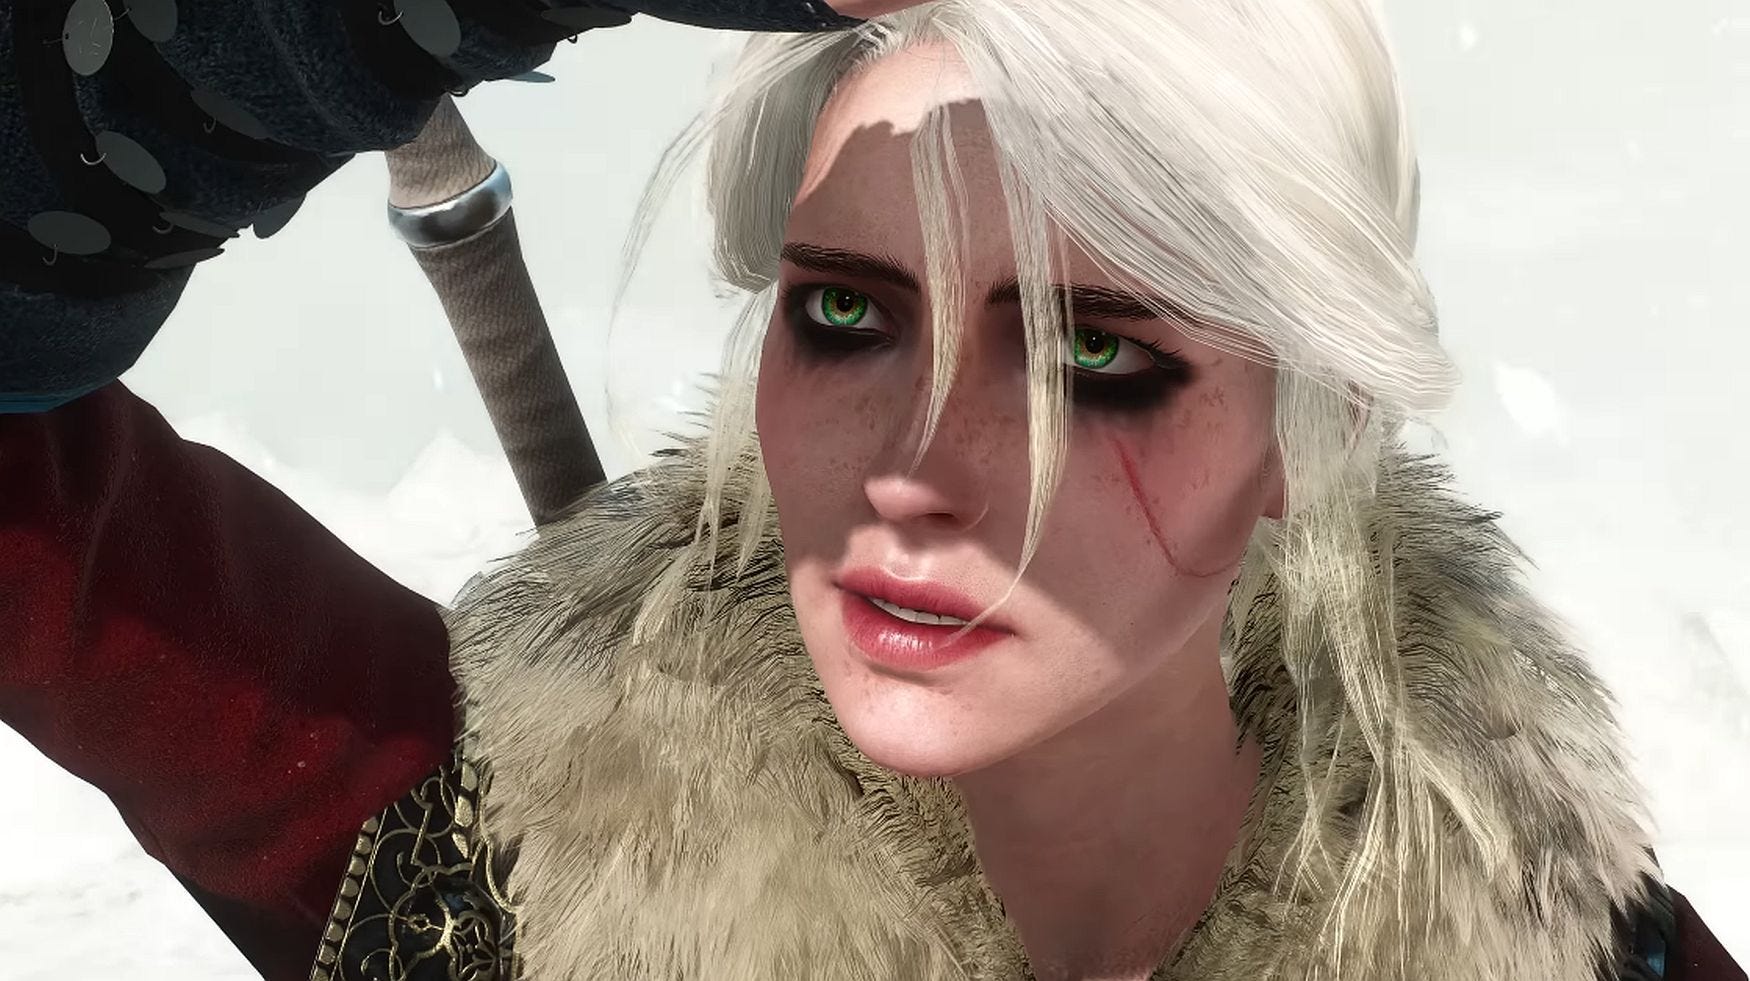 The Witcher’s Project Sirius finds new life as development gets back on track